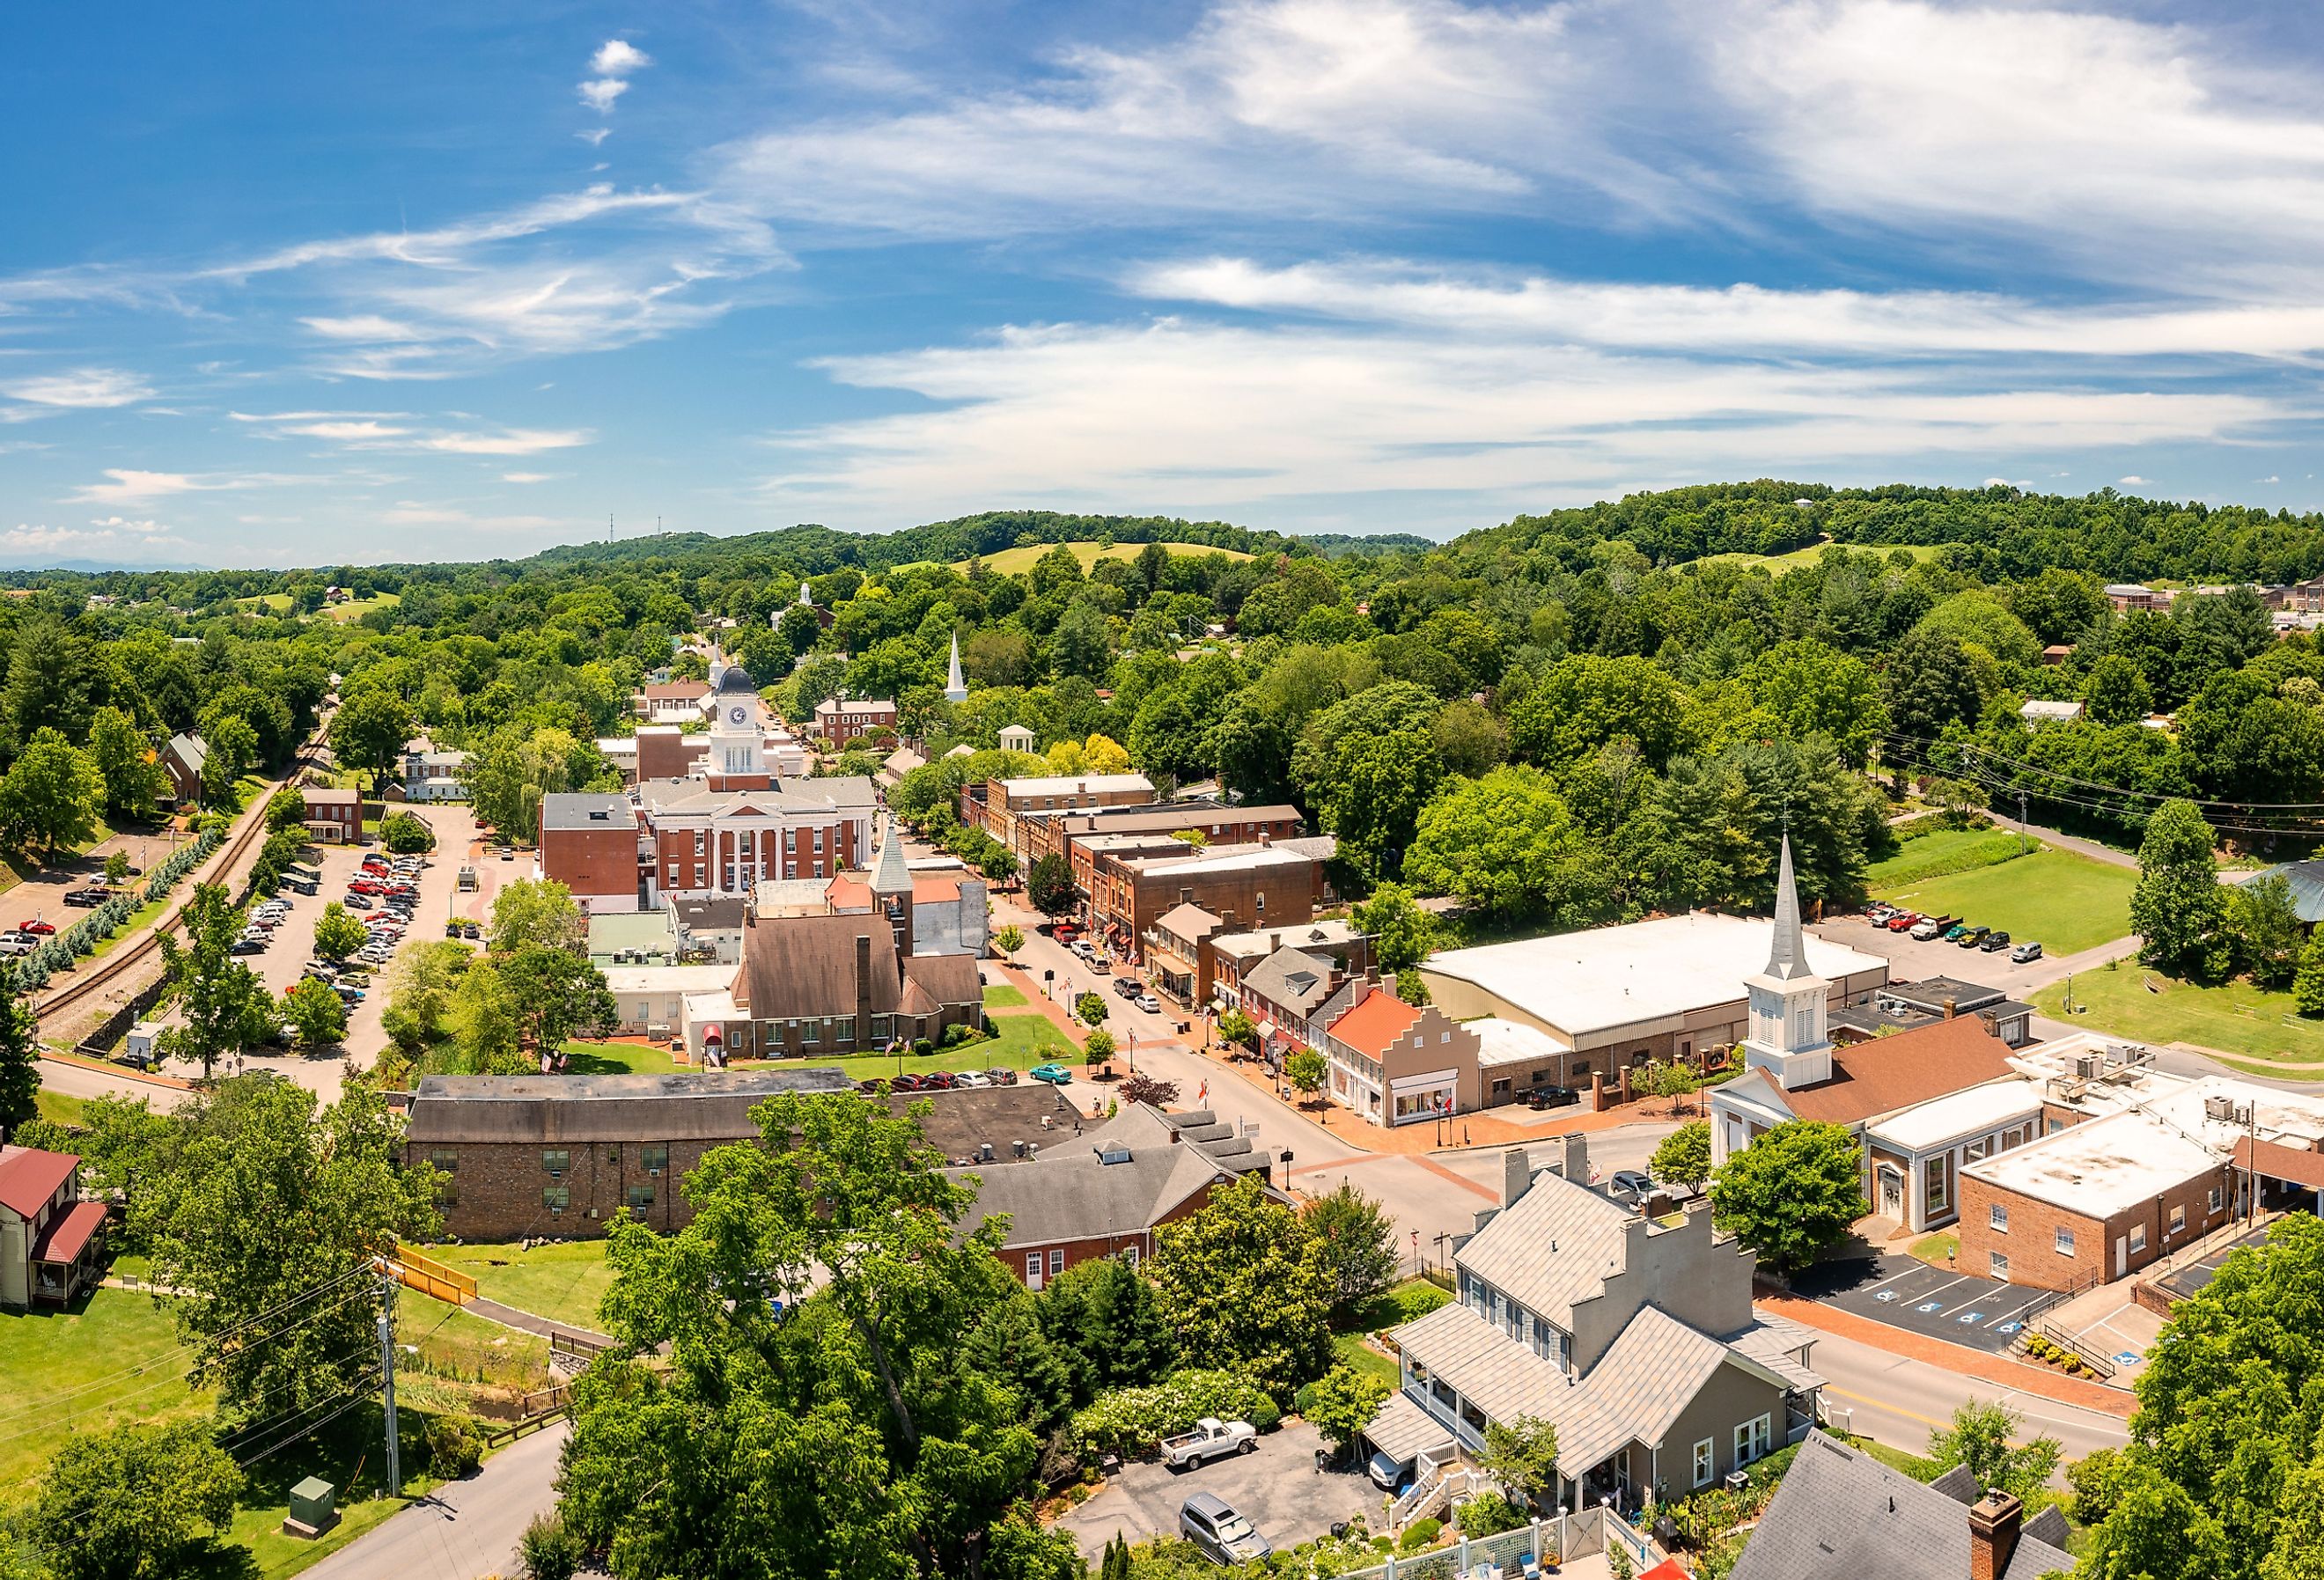 Aerial view of Tennessee's oldest town, Jonesborough. Jonesborough was founded in 1779 and it was the capital for the failed 14th State of the US, known as the State of Franklin. 